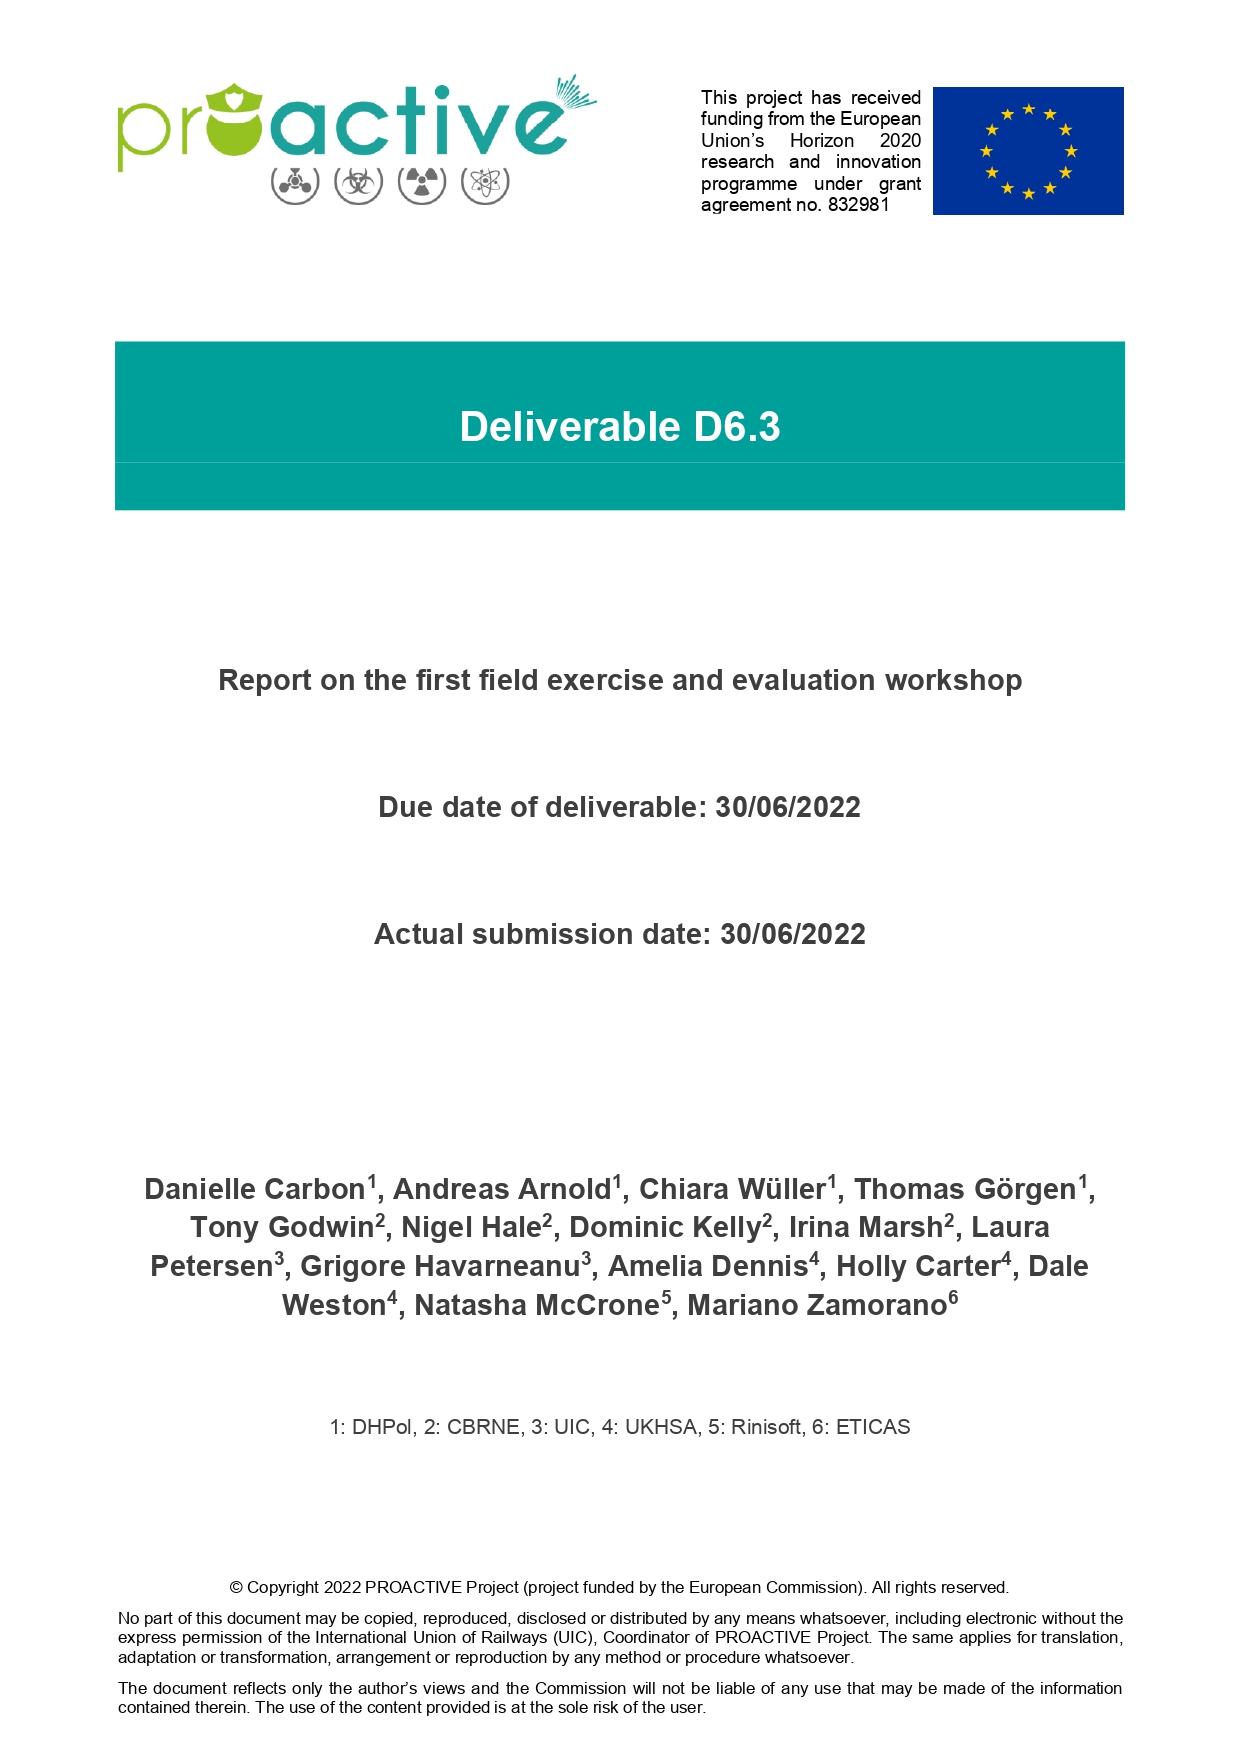 Deliverable D6.3 on the first field exercise and evaluation workshop 